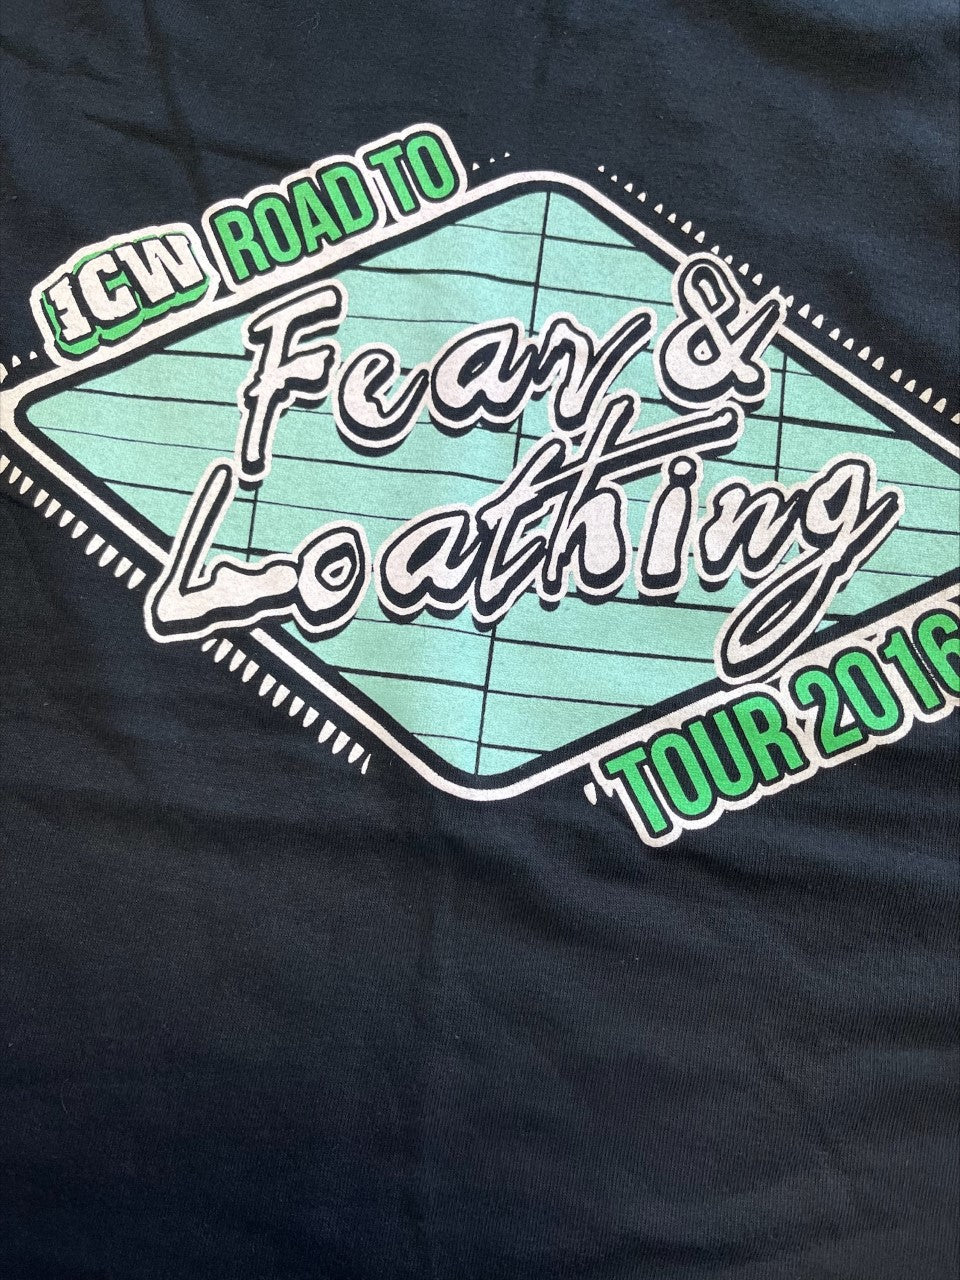 Road to Fear & Loathing IX Tour Tee